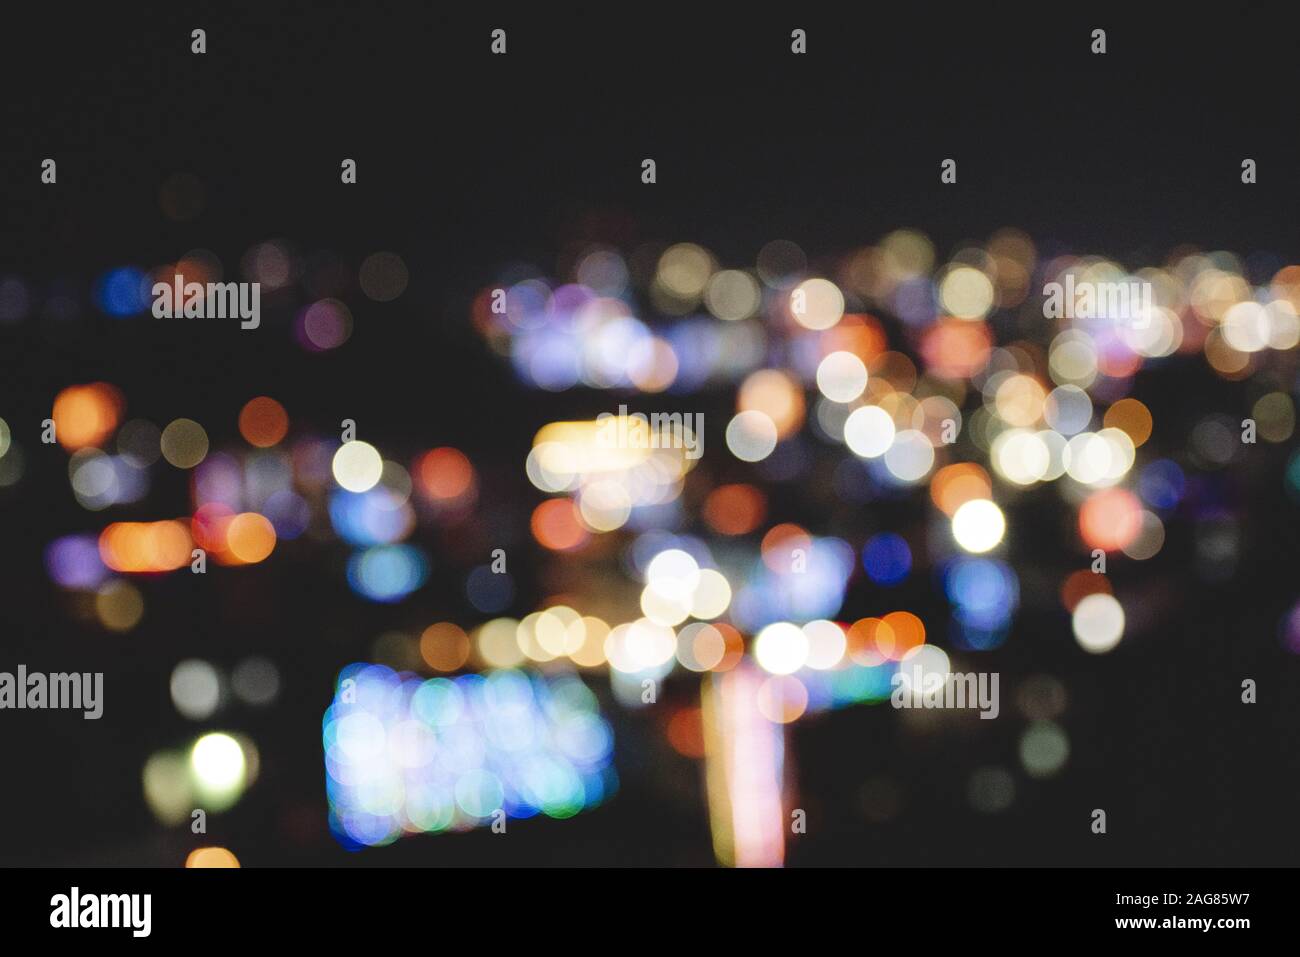 Blurred shot of city buildings with lit lights at night time Stock Photo